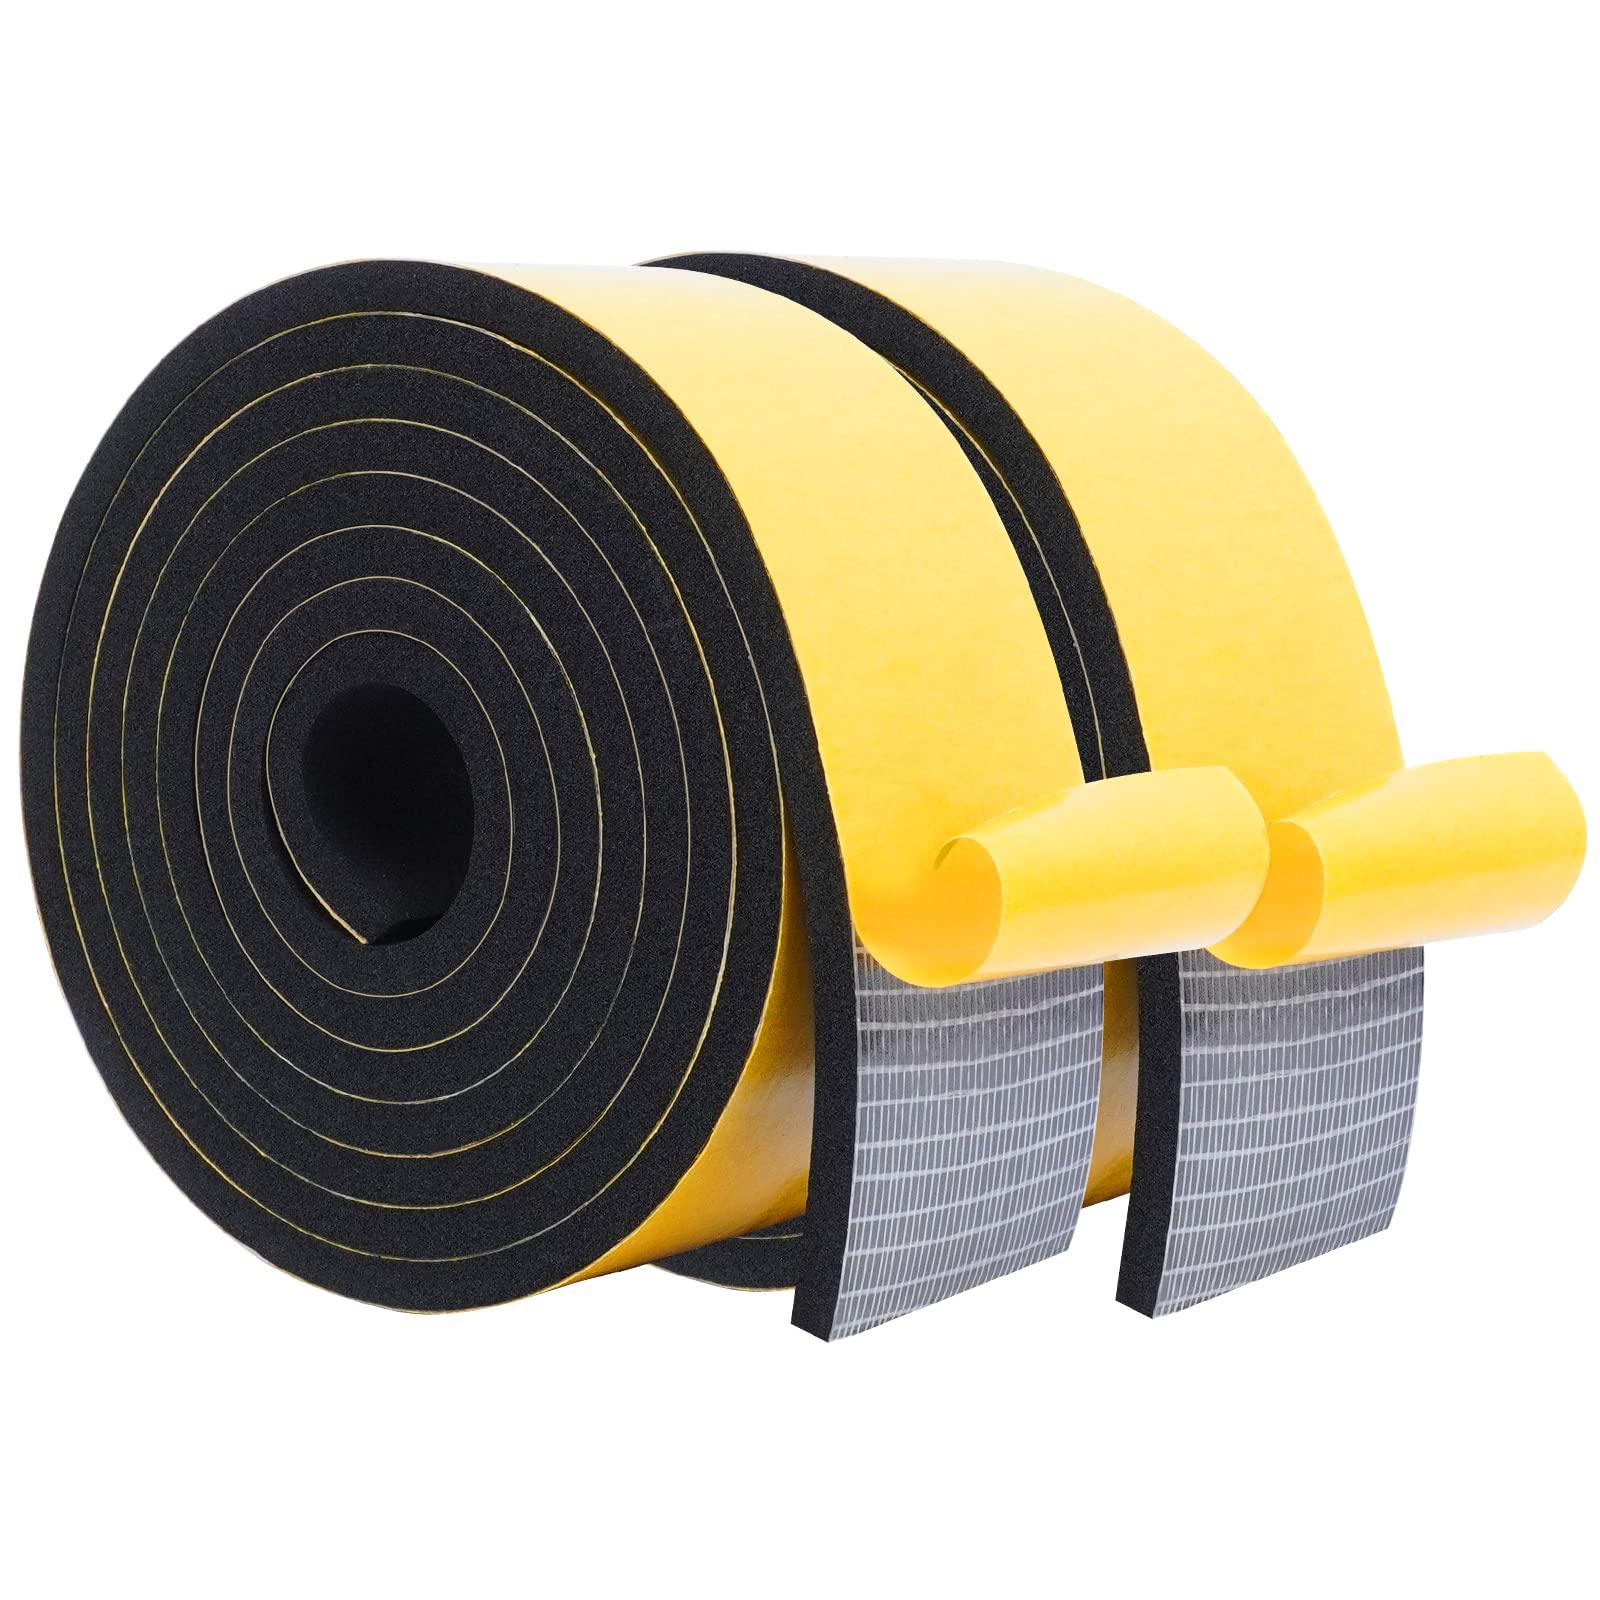 WochiTV High Density Foam Rubber Tape 50mm(W) x 6mm(T), Weatherstrip, Gasket Seal, Anti-Vibration, Anti-Collision, Shockproof, Car, Turck, Air Conditioner, Total 4m (2 Strips, 2M Long Each)